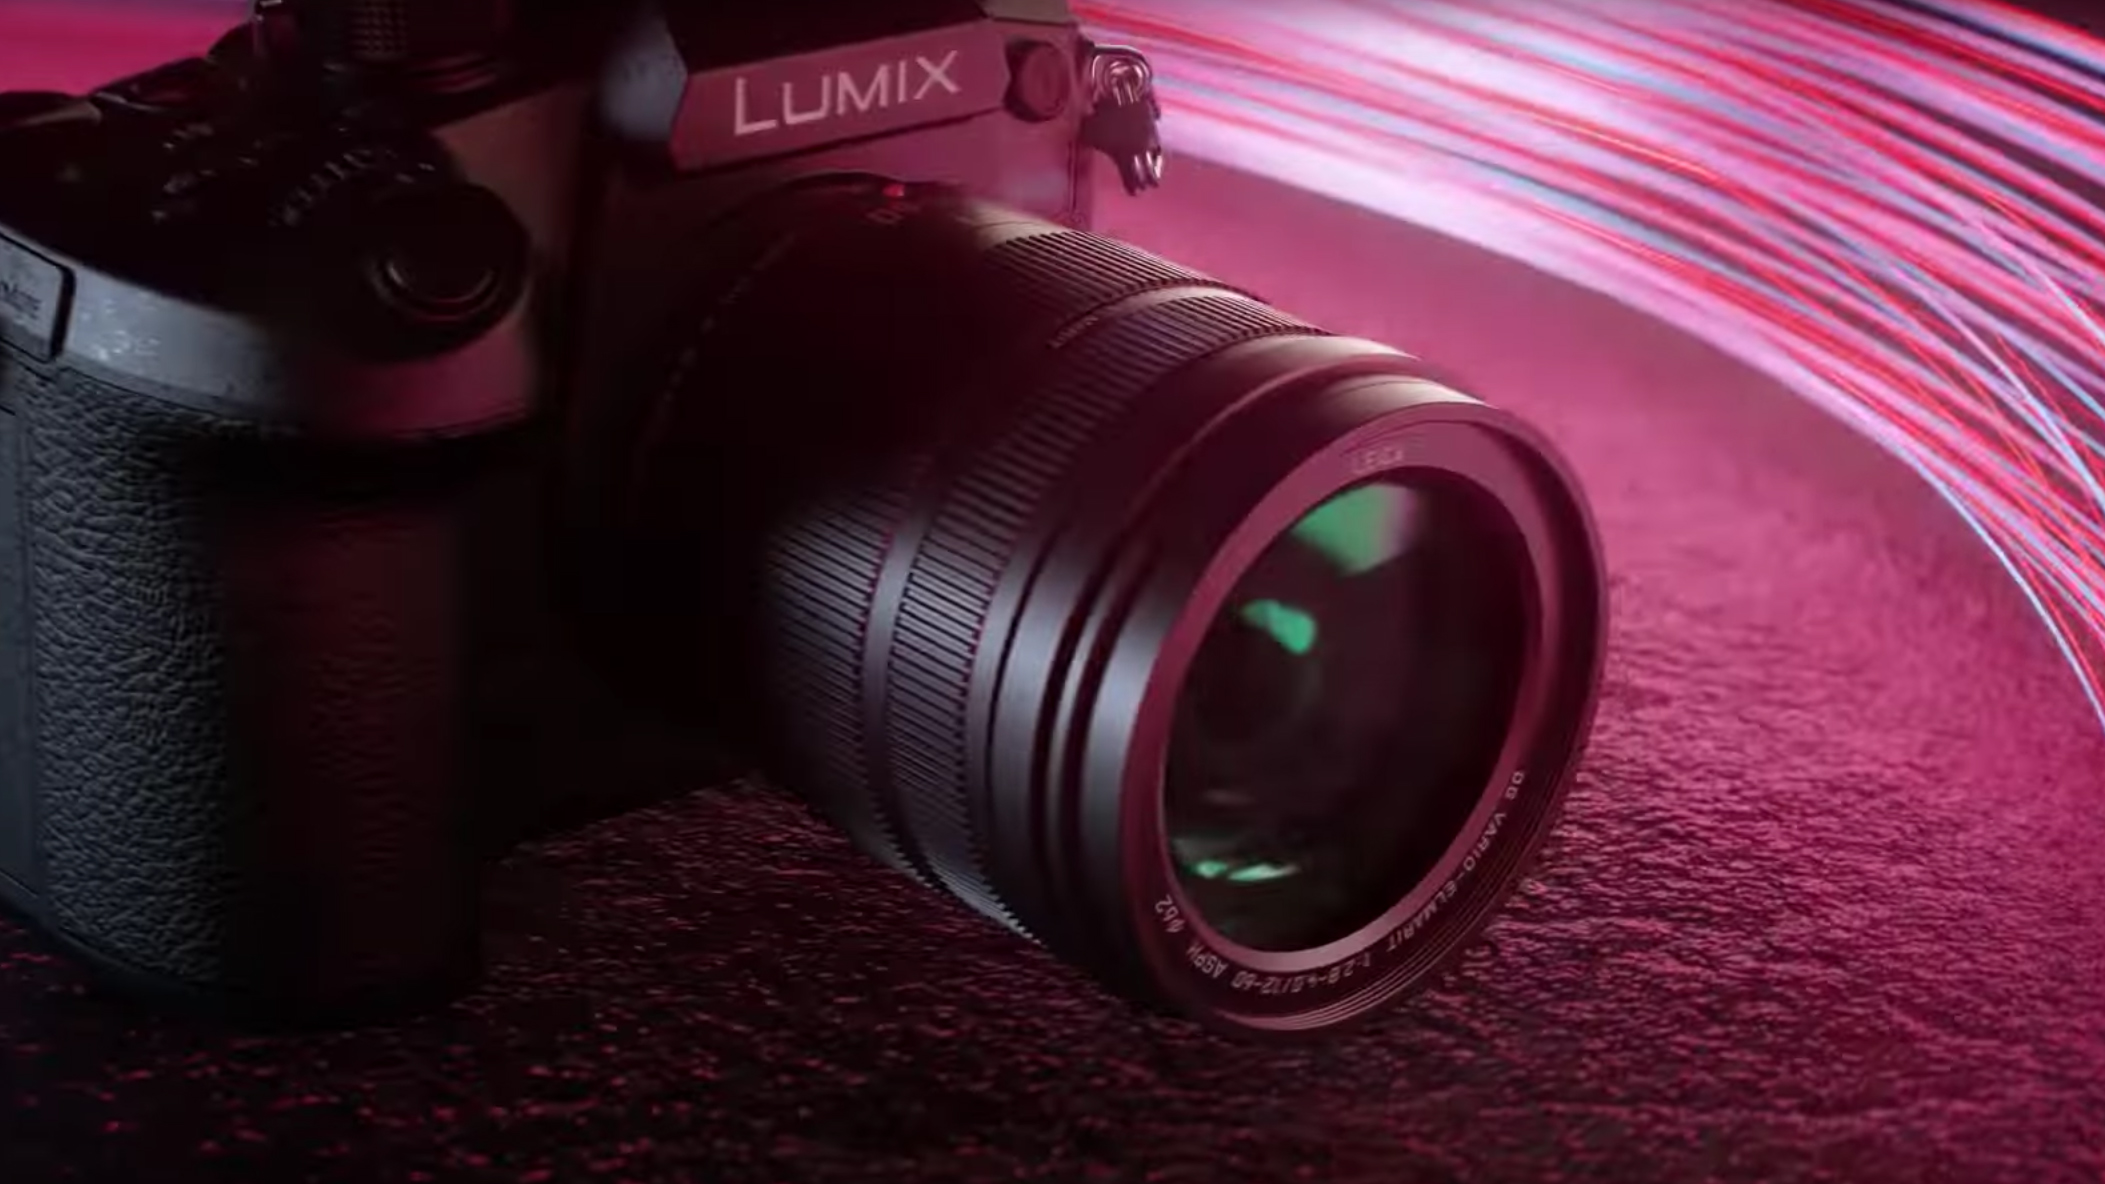 The Panasonic GH6 camera surrounded by purple light